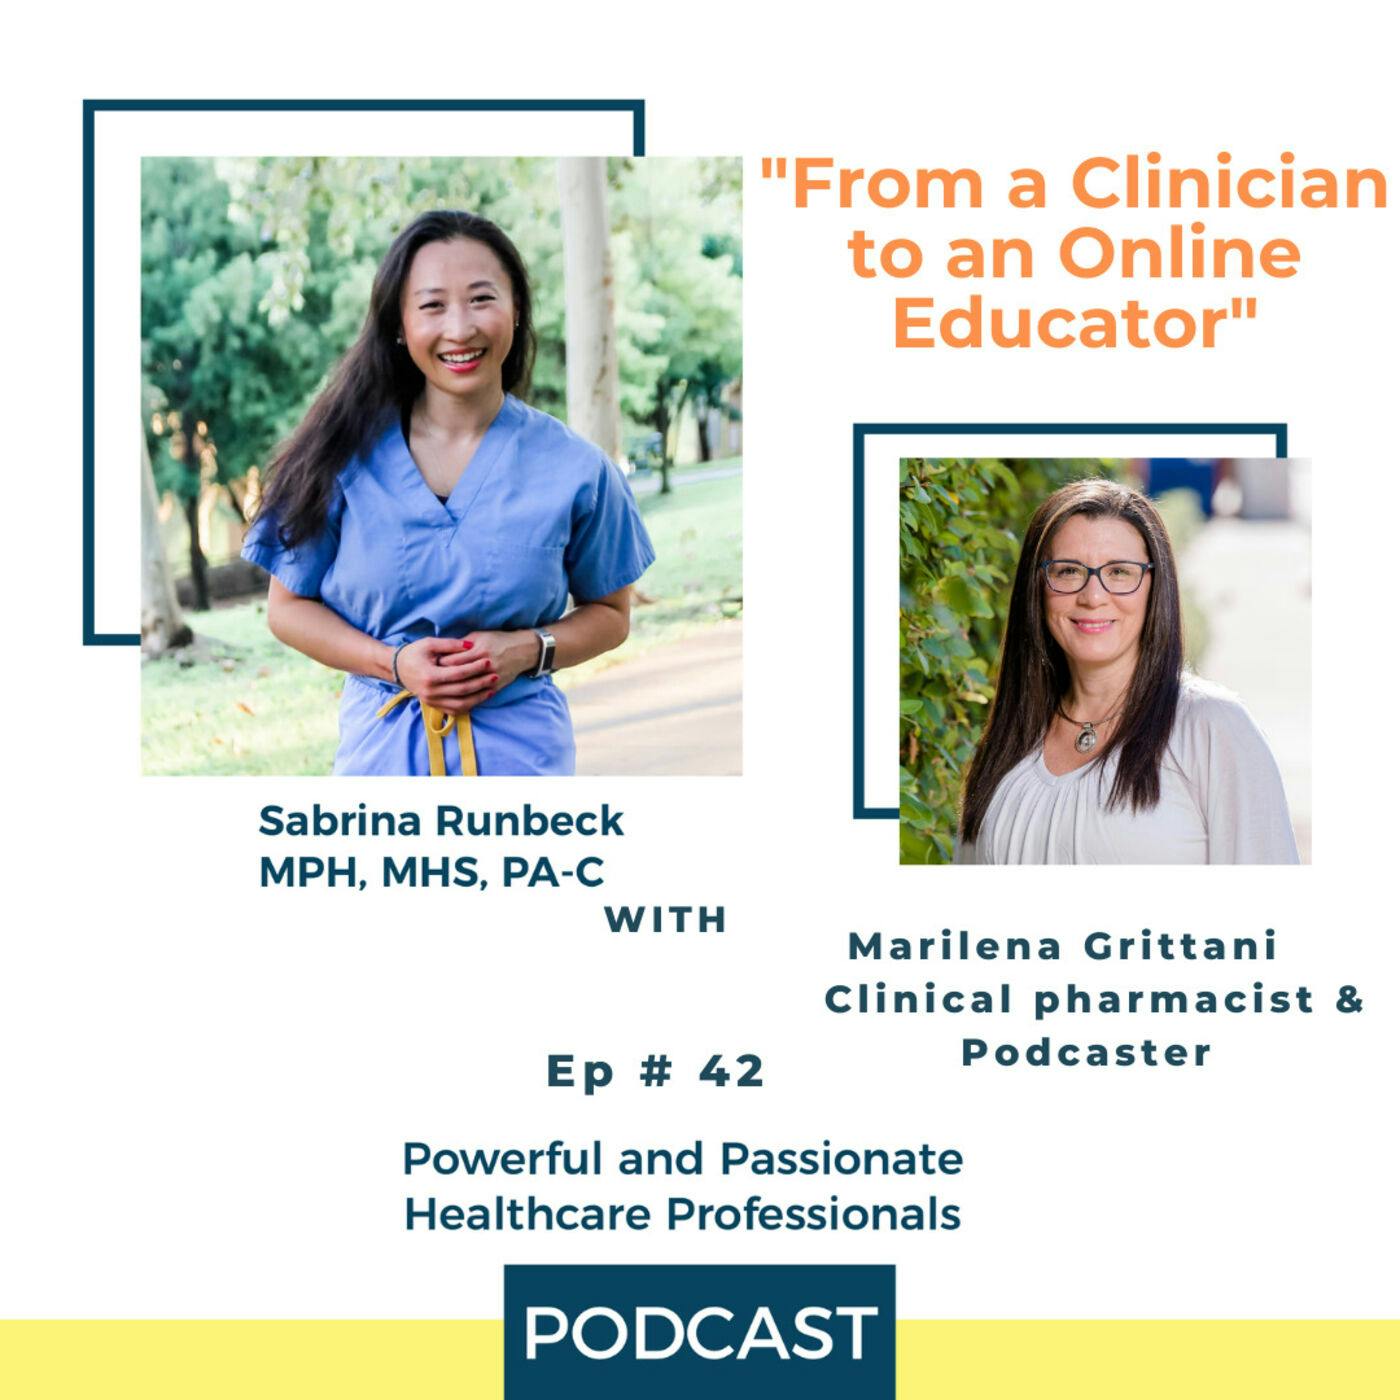 Ep 42 – From a Clinician to an Online Educator with Marilena Grittani